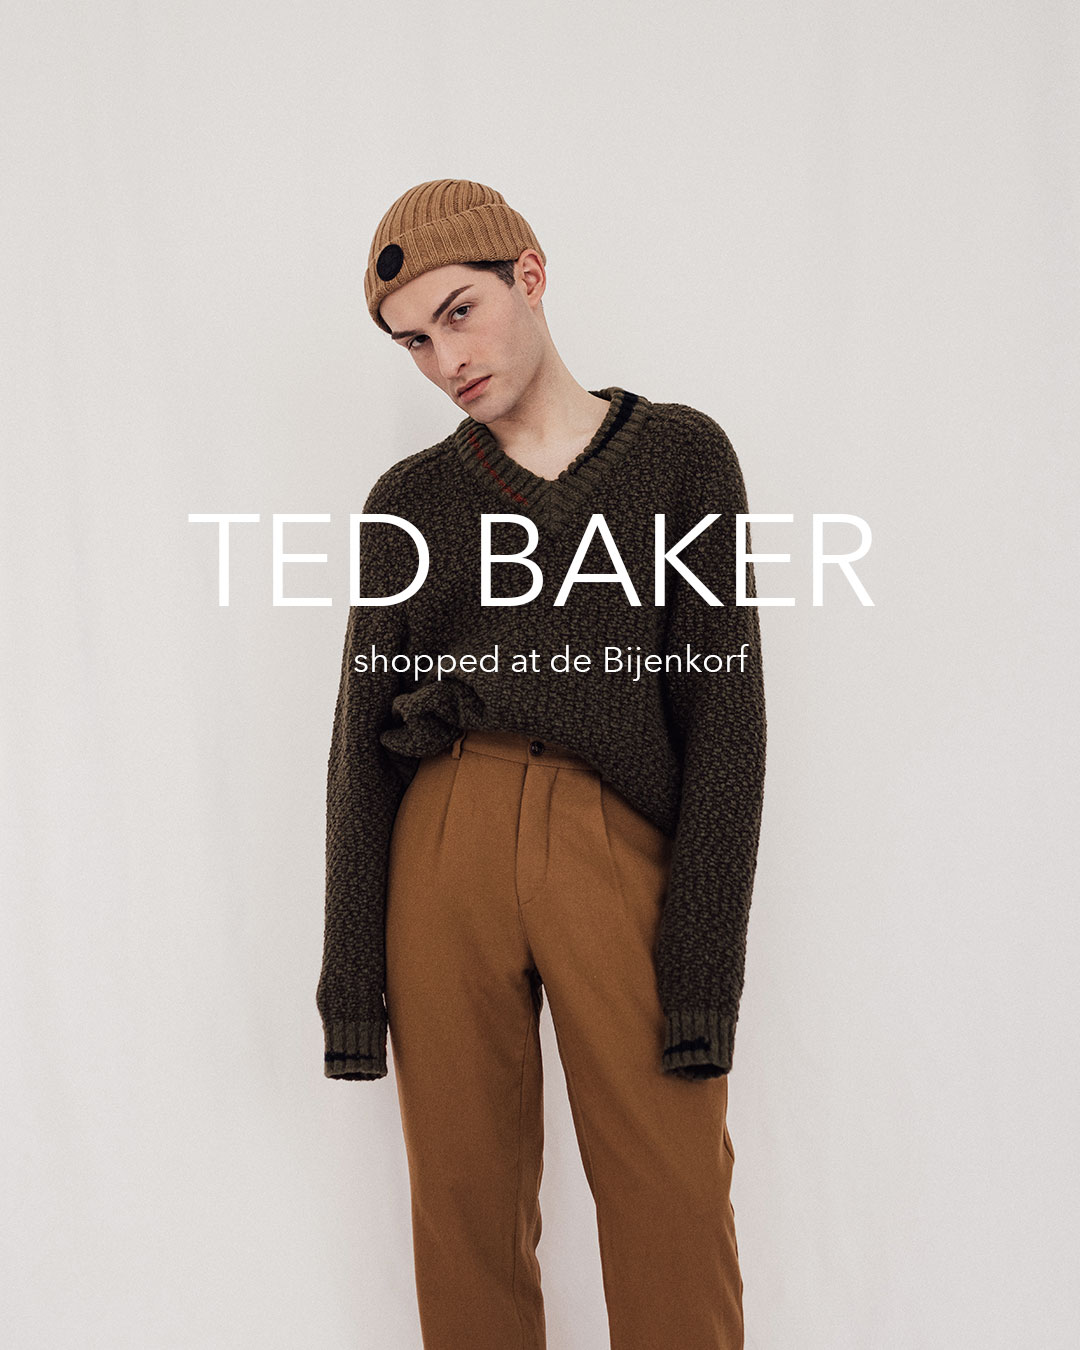 Ted Baker Outfit shopped at de Bijenkorf.